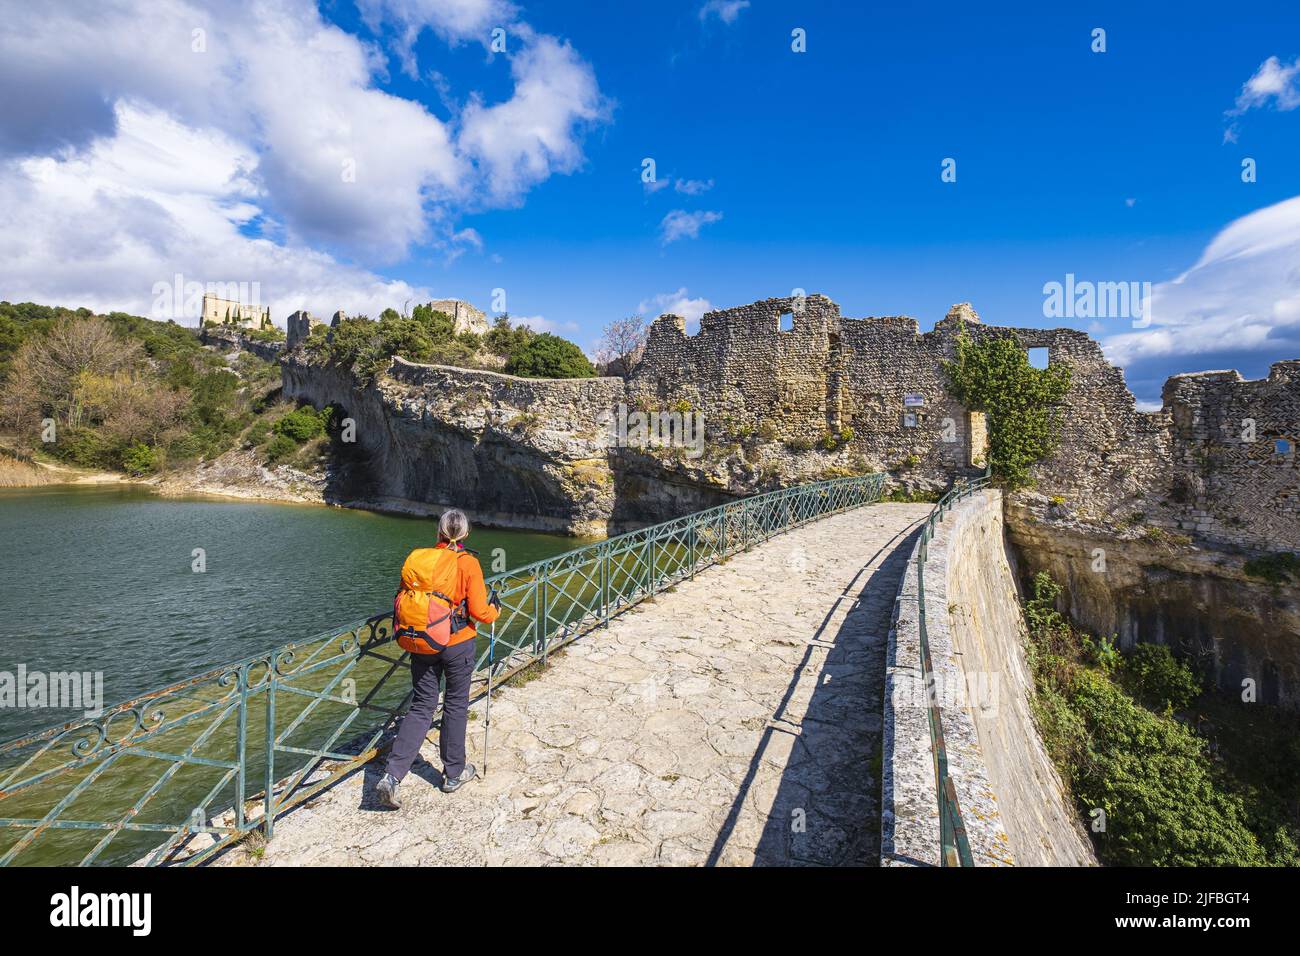 France, Vaucluse, Luberon regional nature park, hike starting from Saint-Saturnin-les-Apt, Saint-Saturnin dam at the foot of the ruins of the medieval castle Stock Photo